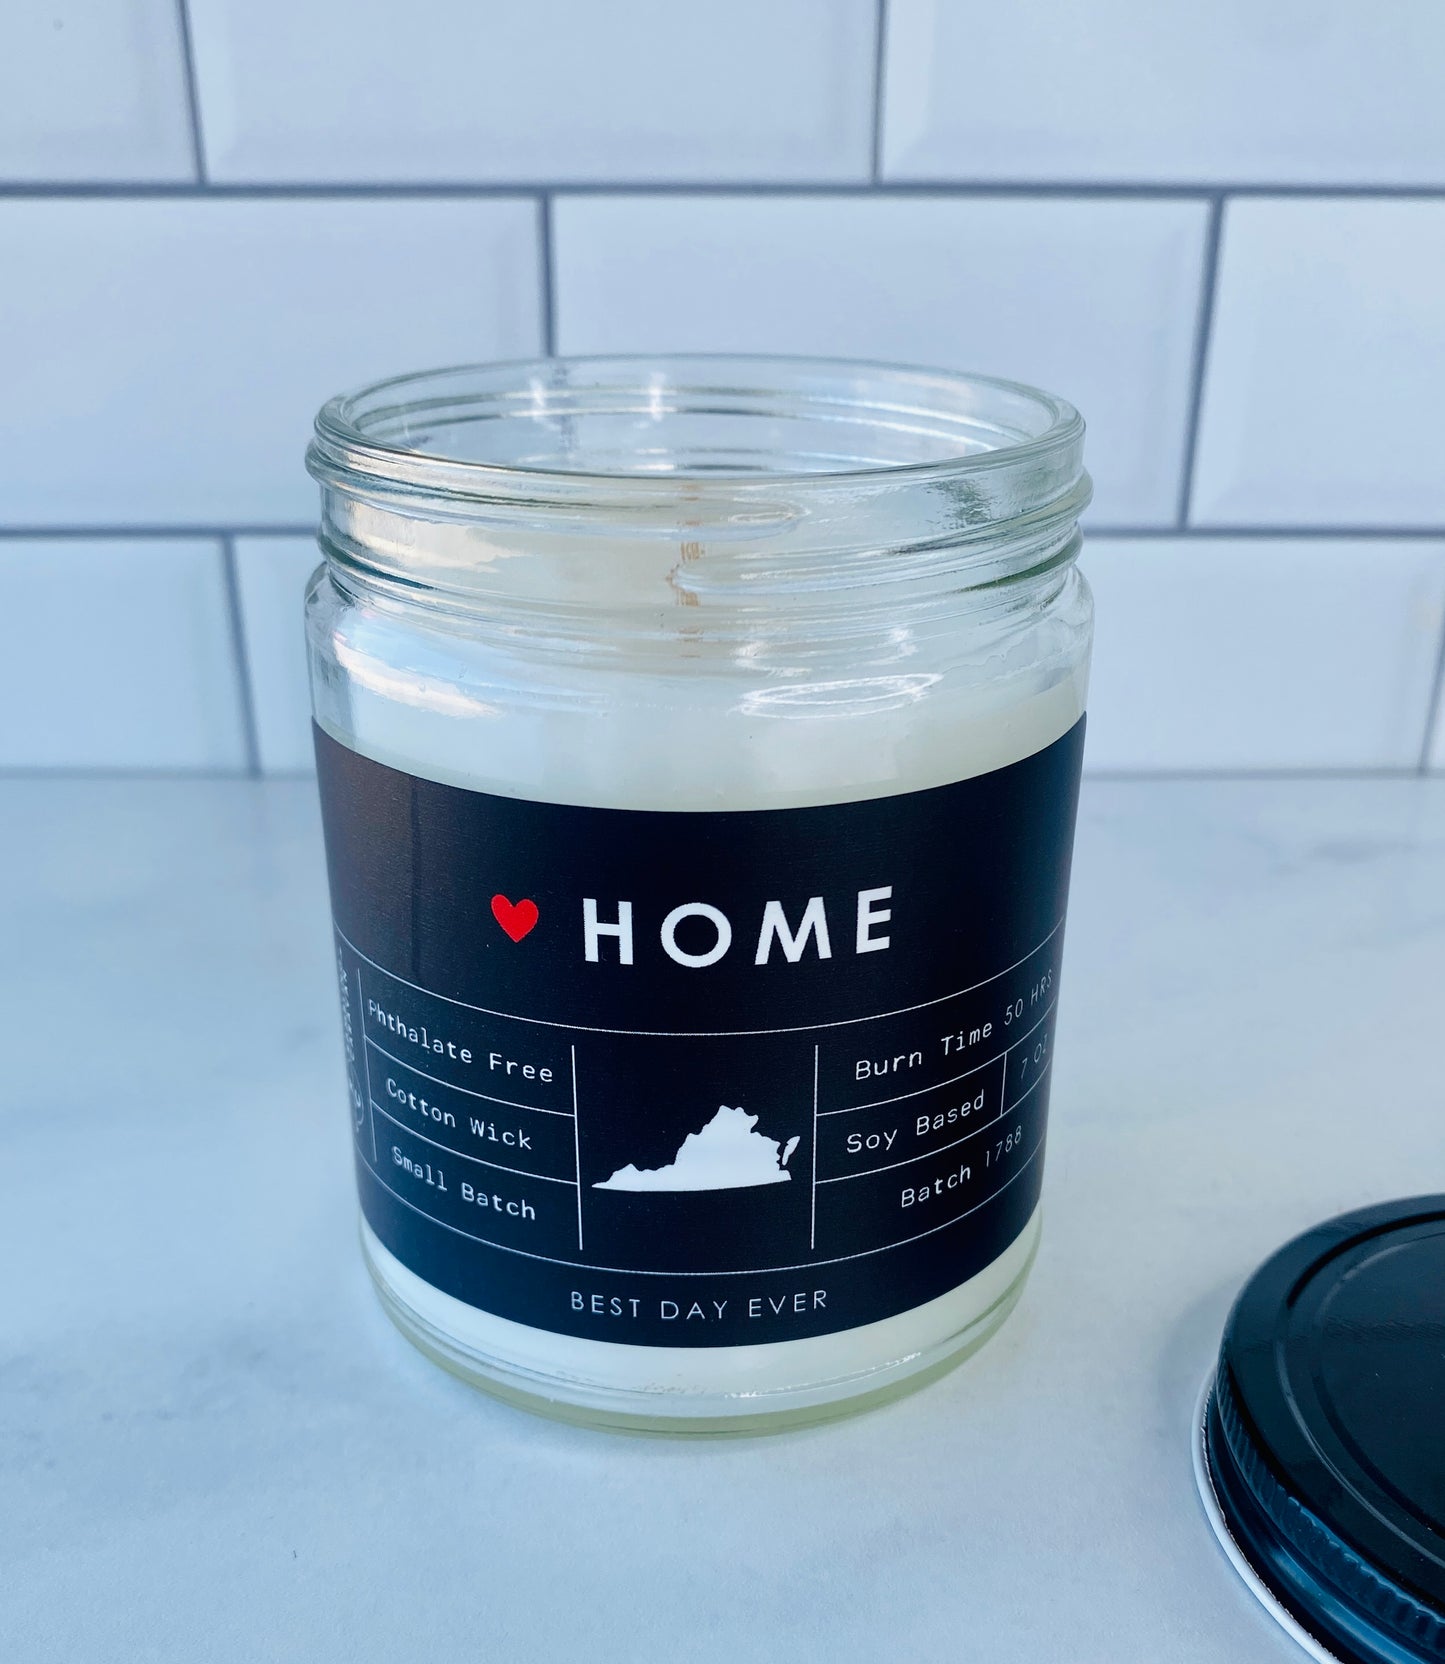 Home (Virginia) Candle